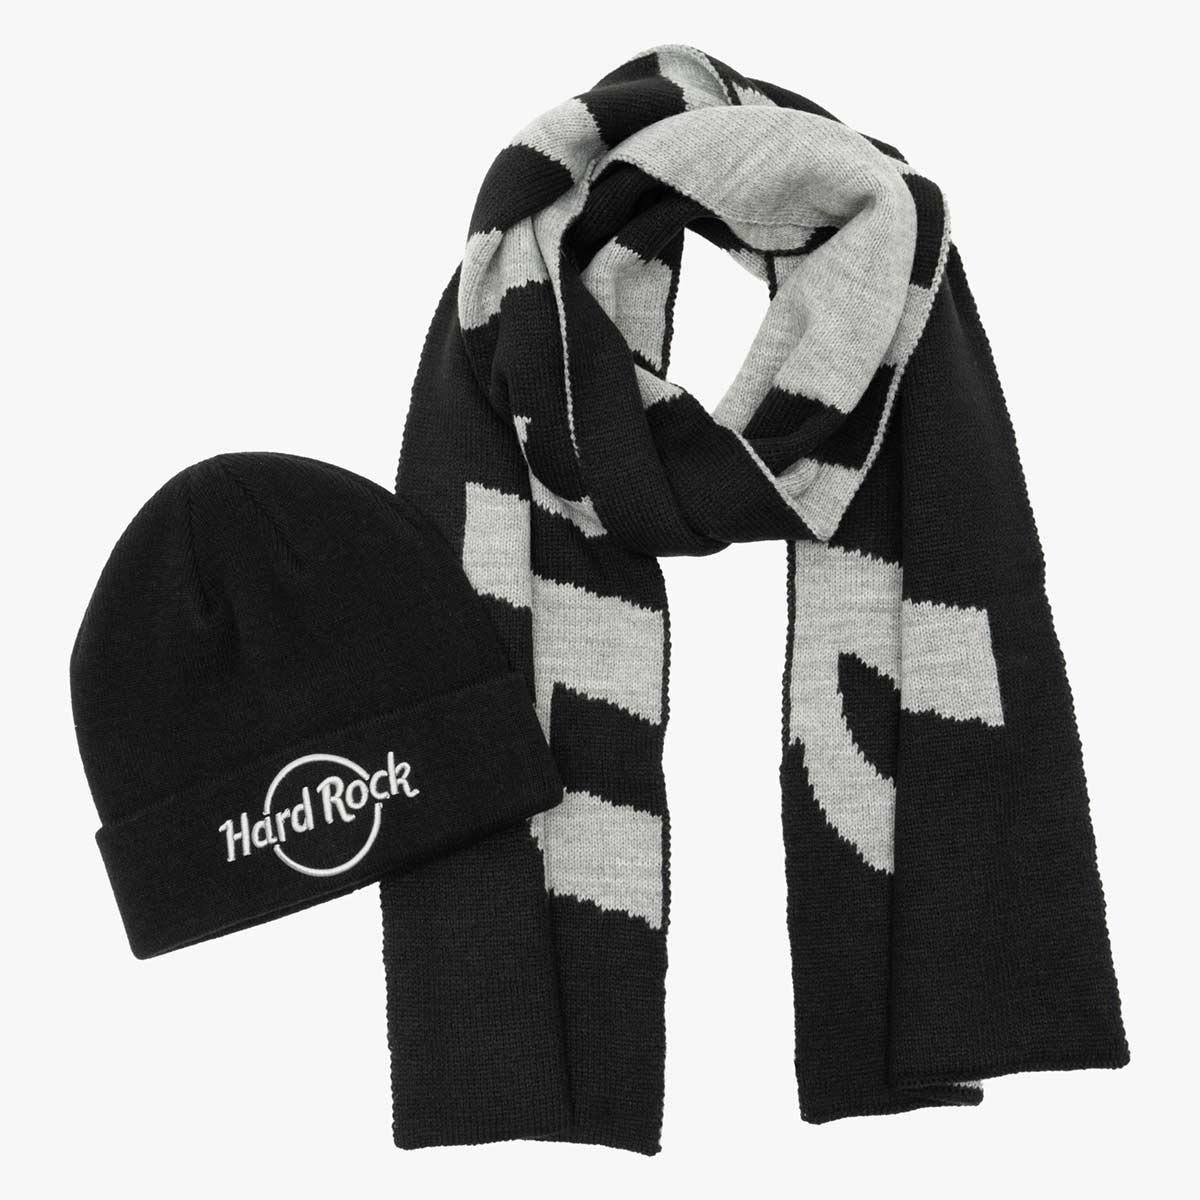 Scarf and Beanie Set in Black by Hard Rock image number 1